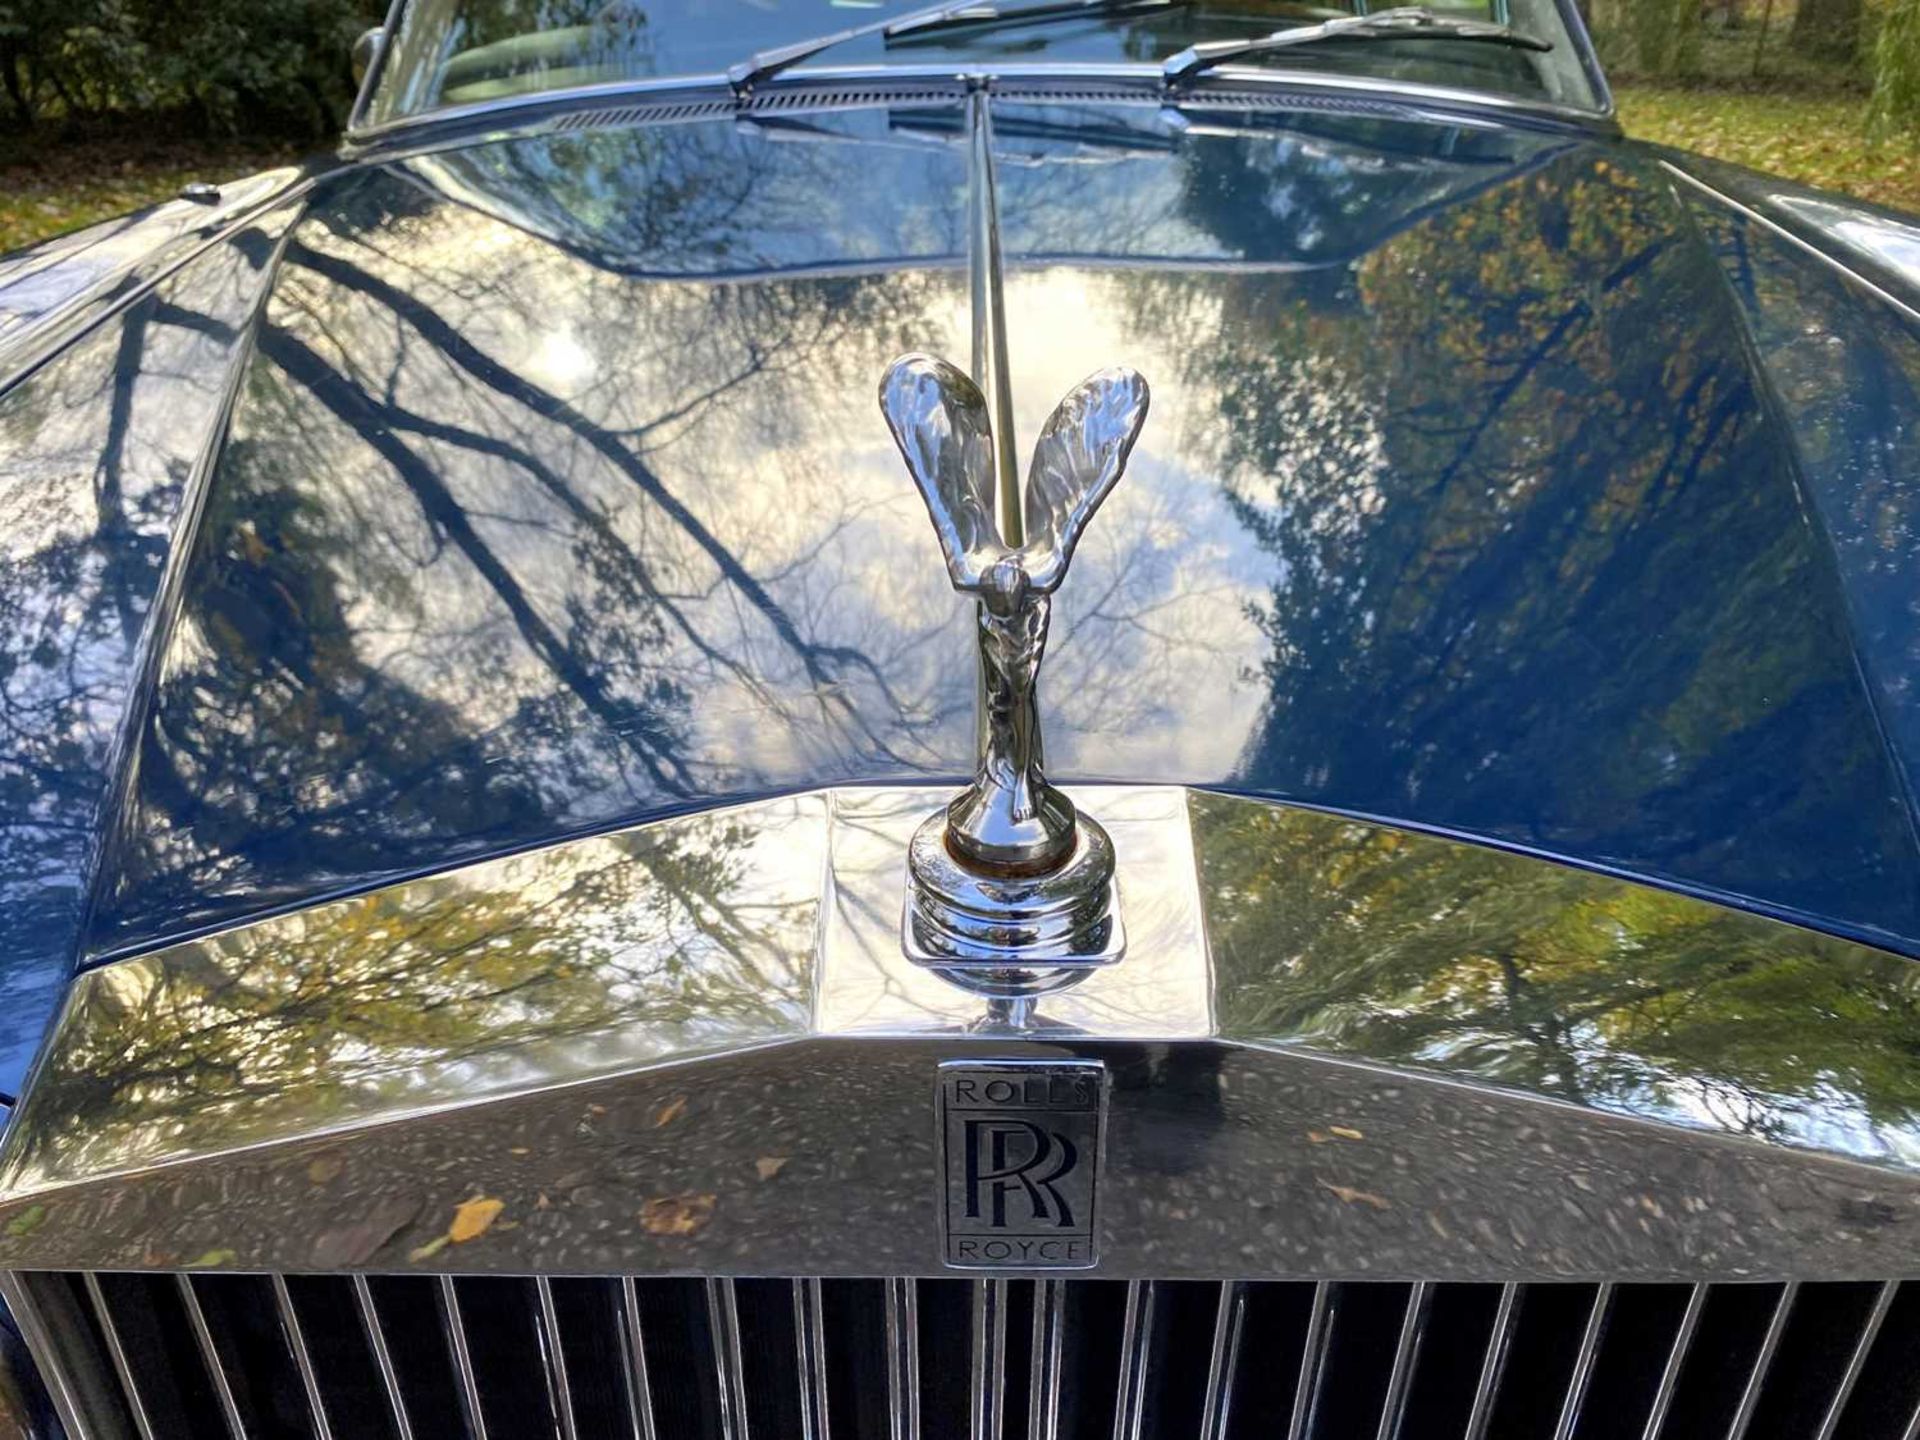 1971 Rolls-Royce Corniche Saloon Finished in Royal Navy Blue with Tobacco hide - Image 77 of 100